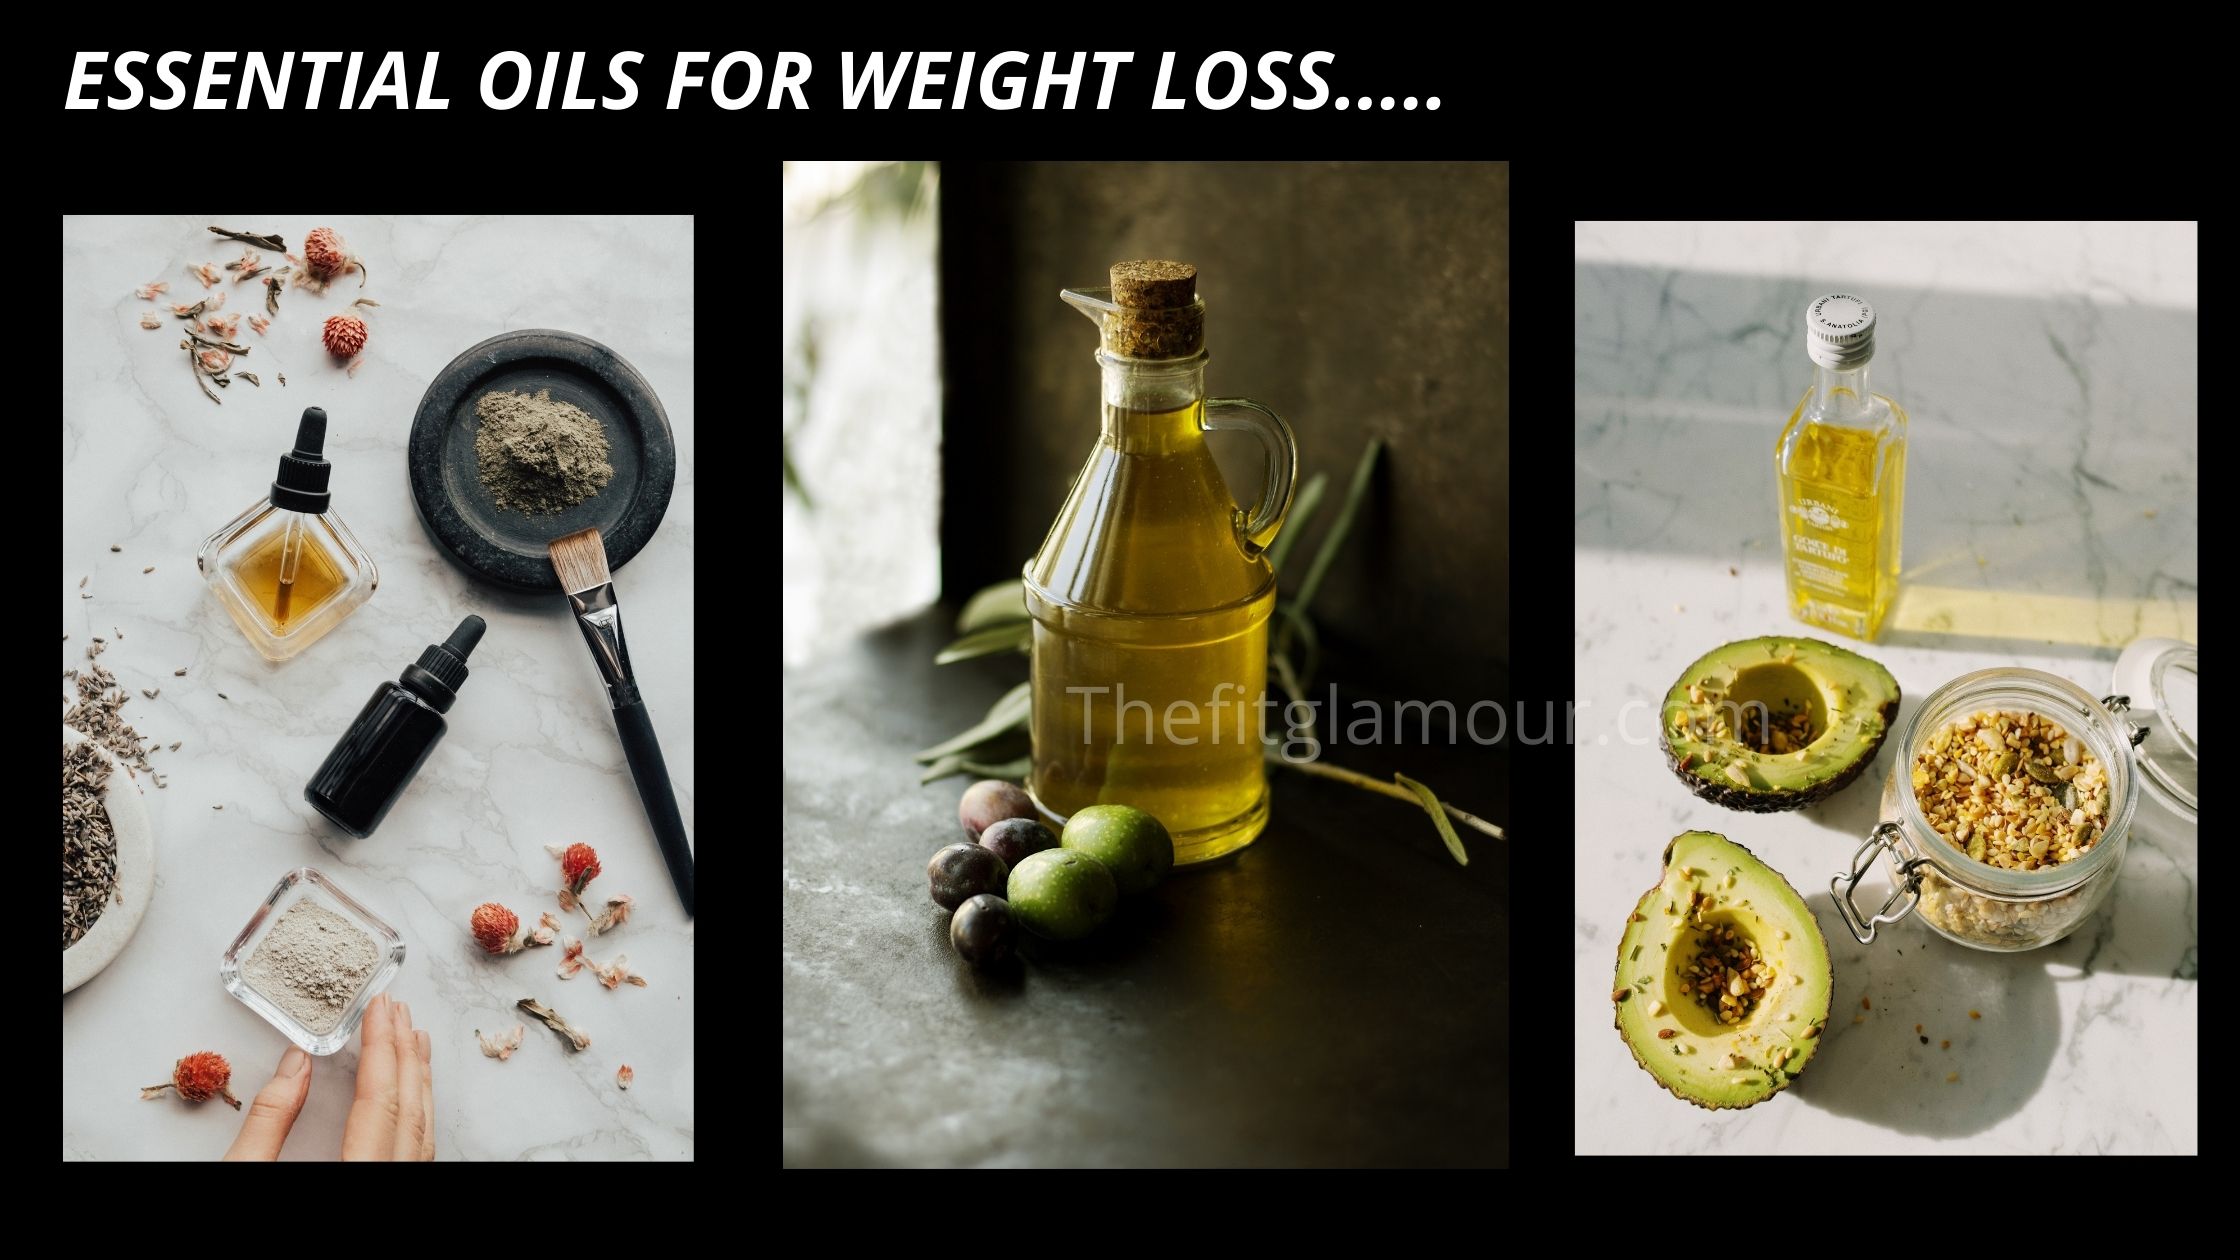 ESSENTIAL OILS FOR WEIGHT LOSS 